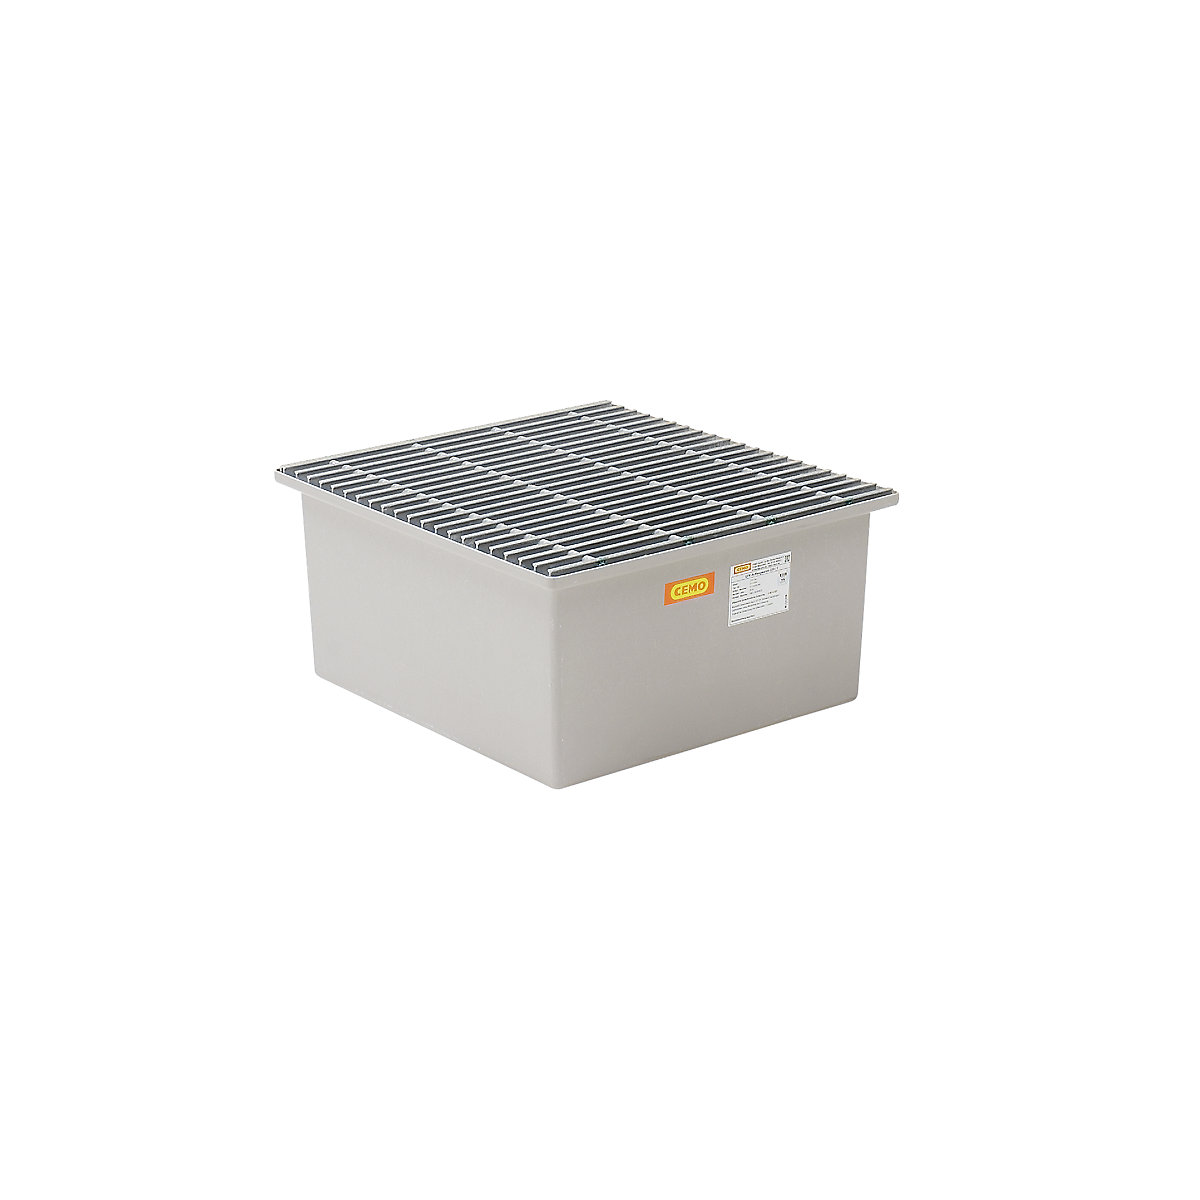 GRP base sump tray – CEMO, 1 x 200 litre drum, with certification, with GRP grate-5